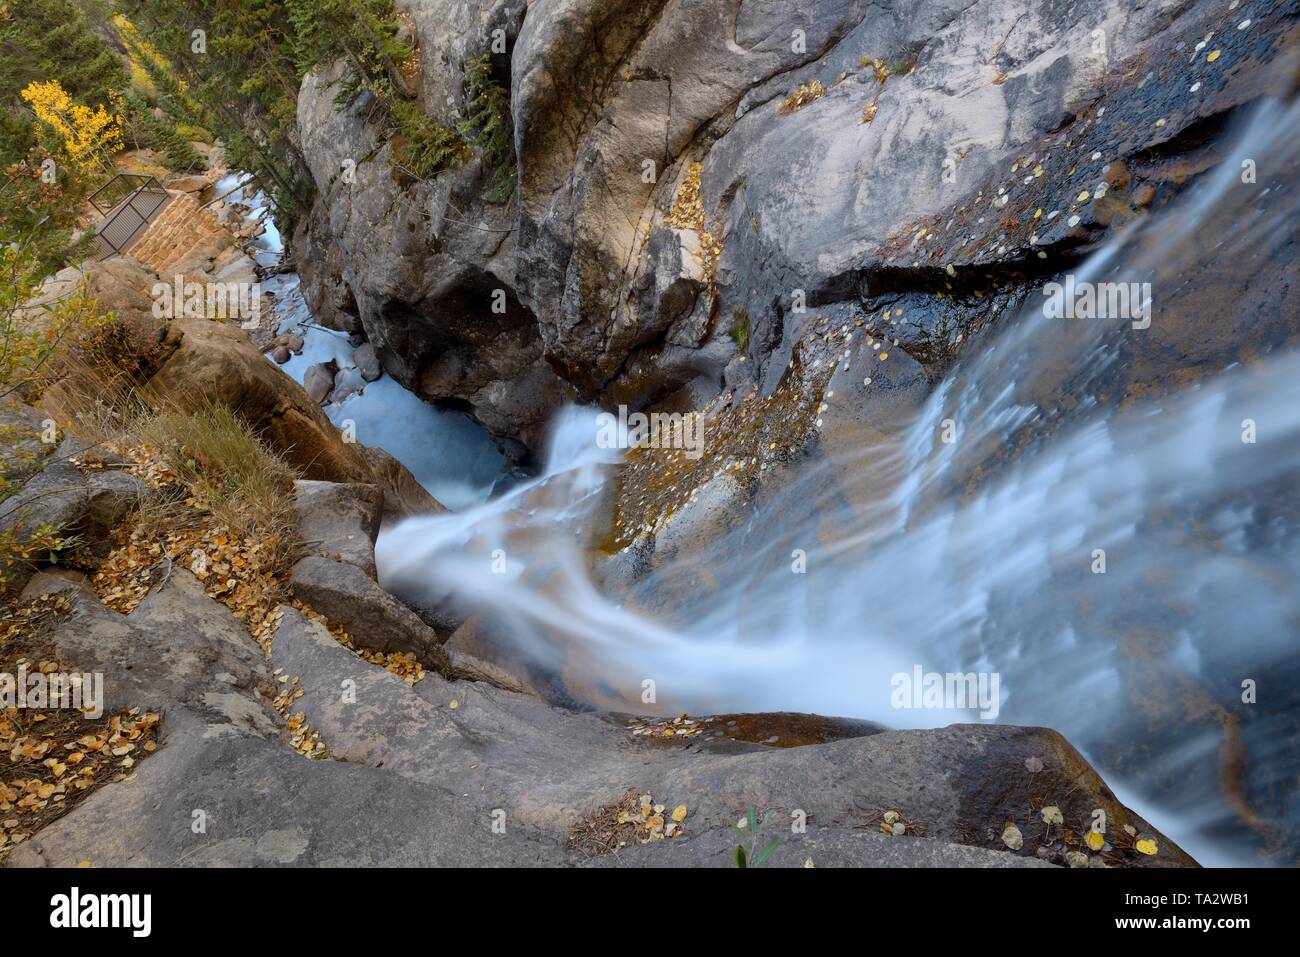 Chasm Falls - Top view of Fall River at Chasm Falls in Rocky Mountain National Park. Colorado, USA. Stock Photo